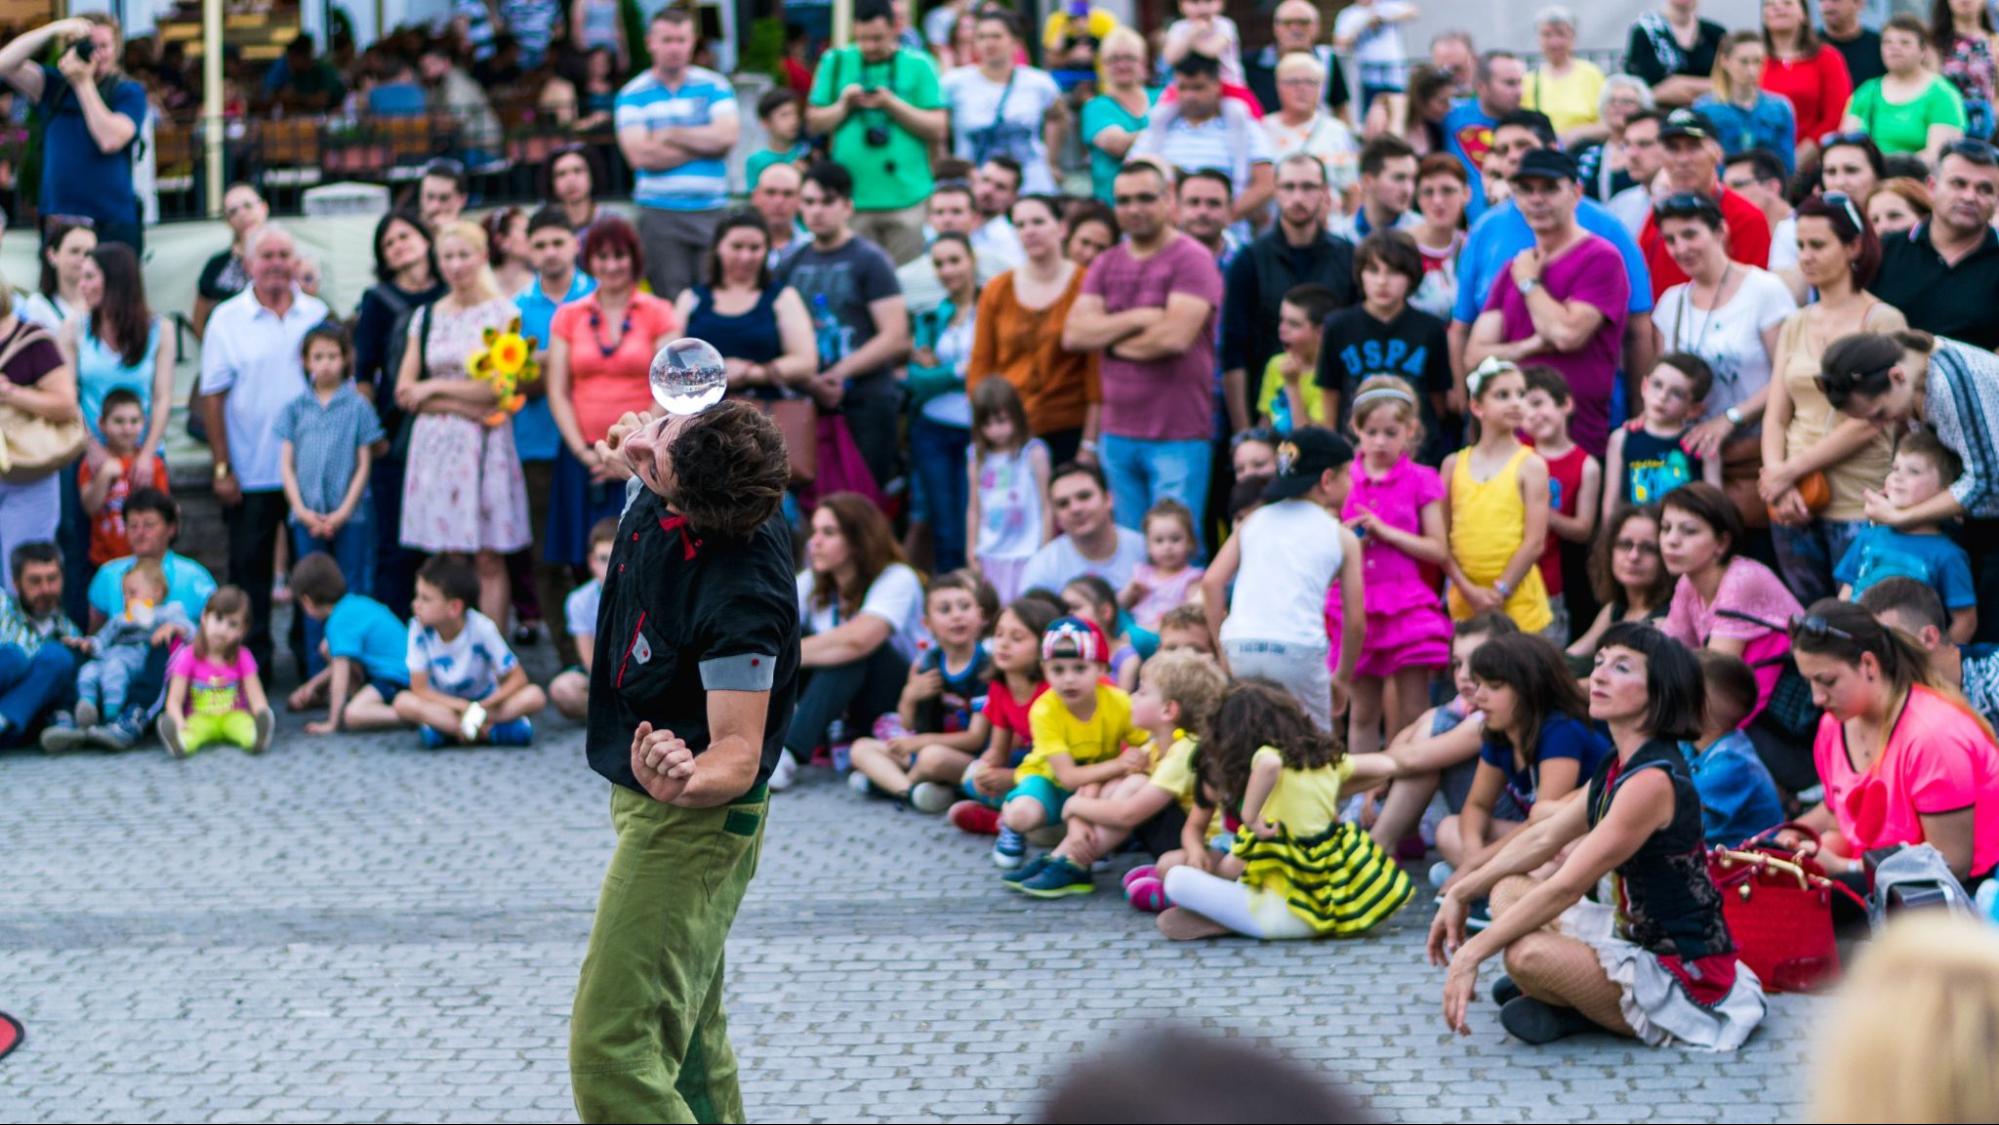 A member of Kinemtatos, Manoamano Circo, Argentina performing a trick in the Little Square during Sibiu International Theatre Festival, Sibiu, Romania